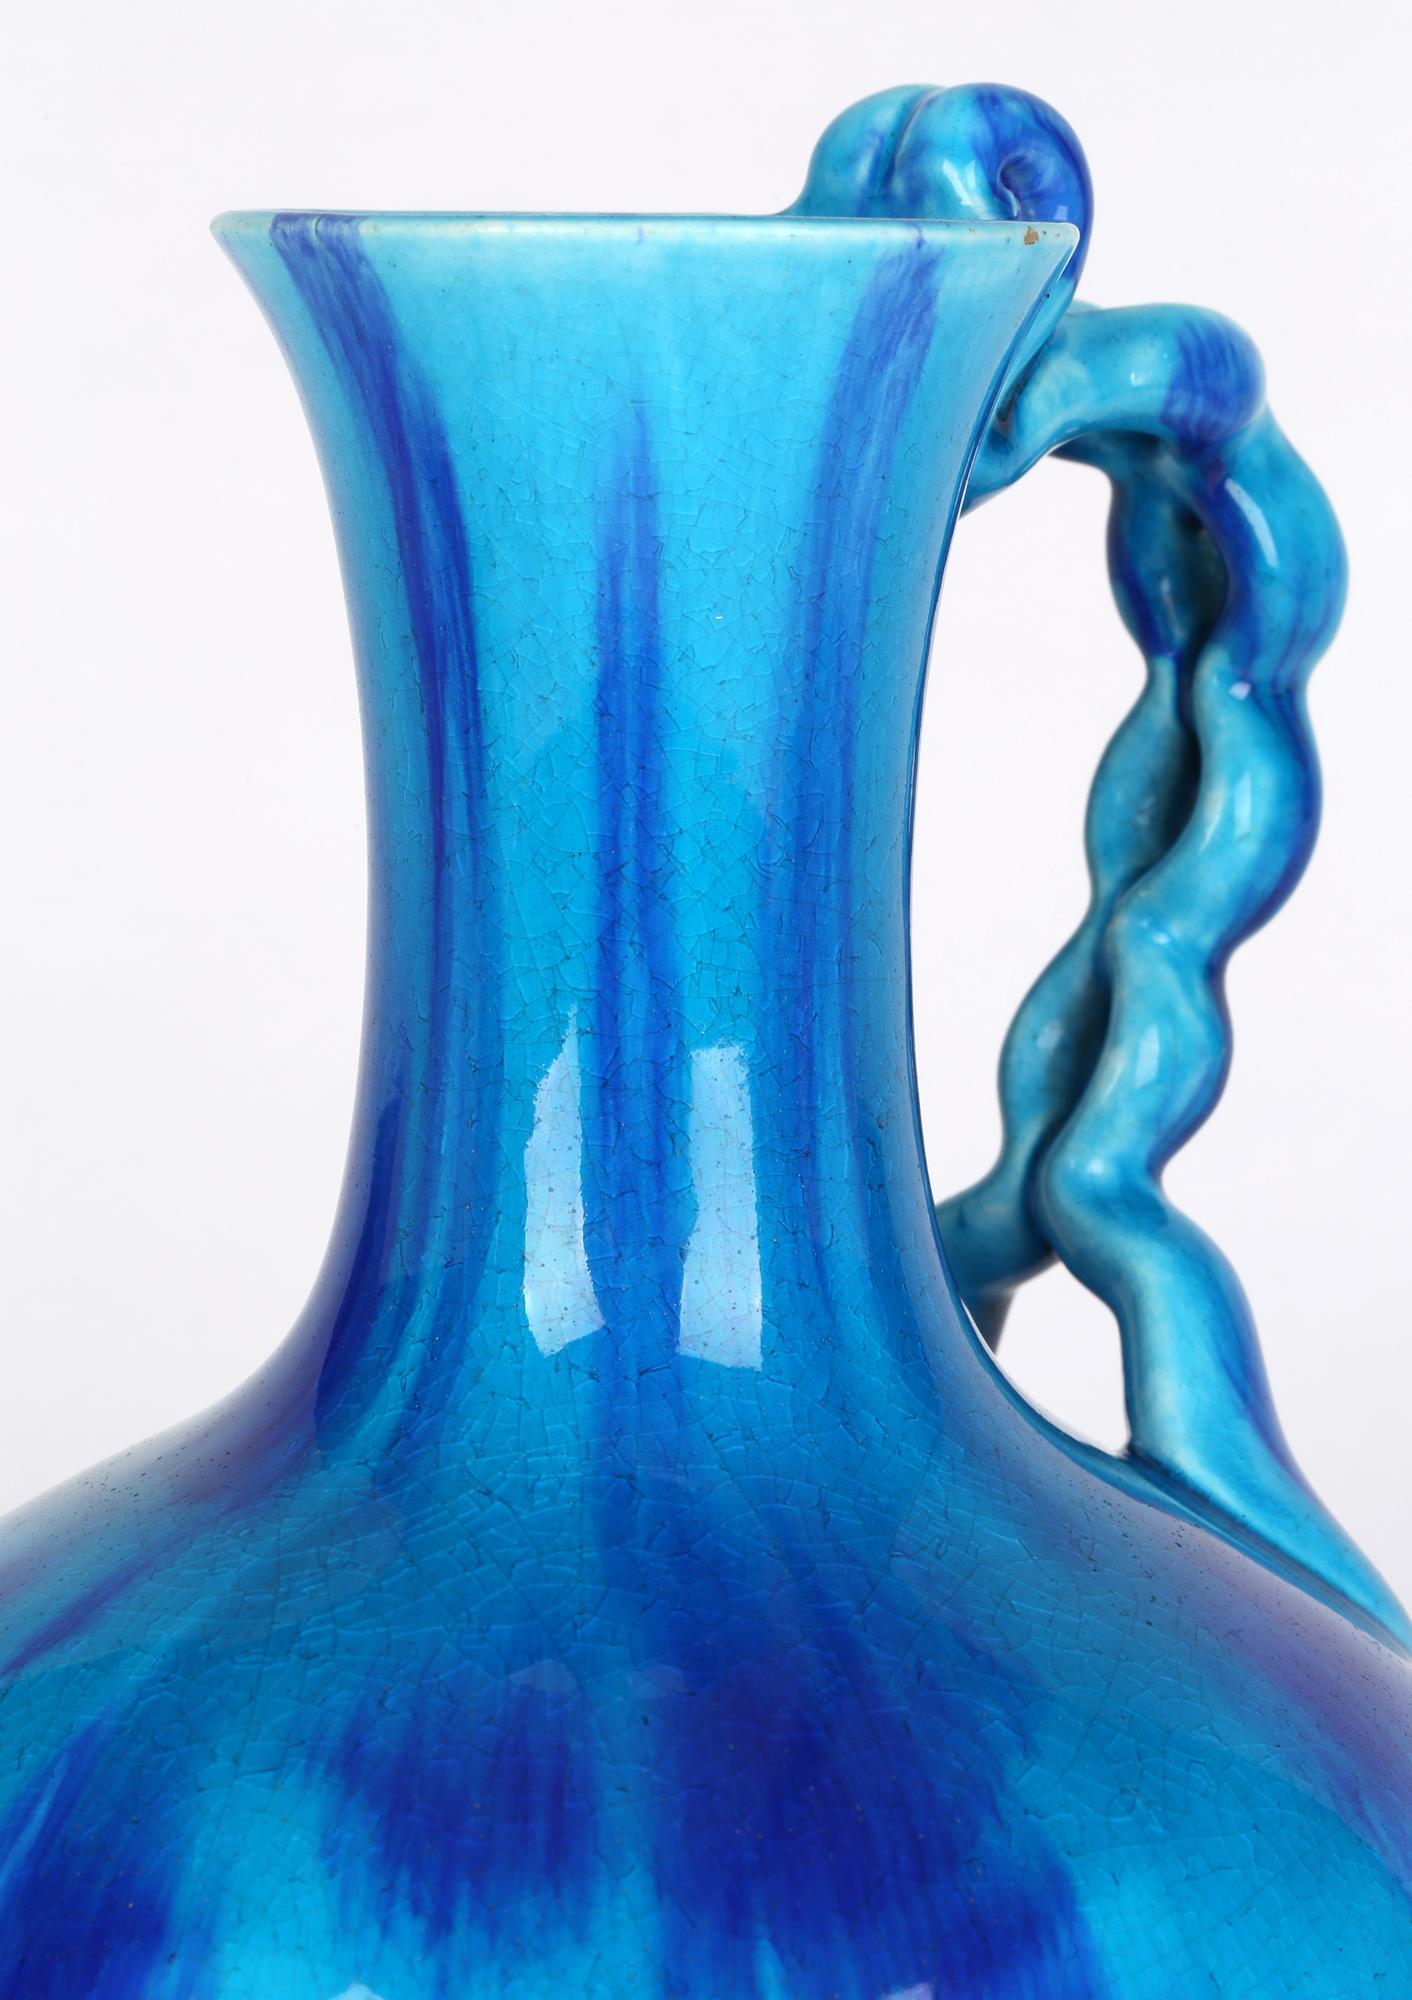 A very stylish Minton Aesthetic Movement turquoise glazed handled vase dated 1870. The earthenware vase stands on a narrow round foot with a rounded bulbous body and narrow neck with a flared top. A twin open chain style handle is applied to the